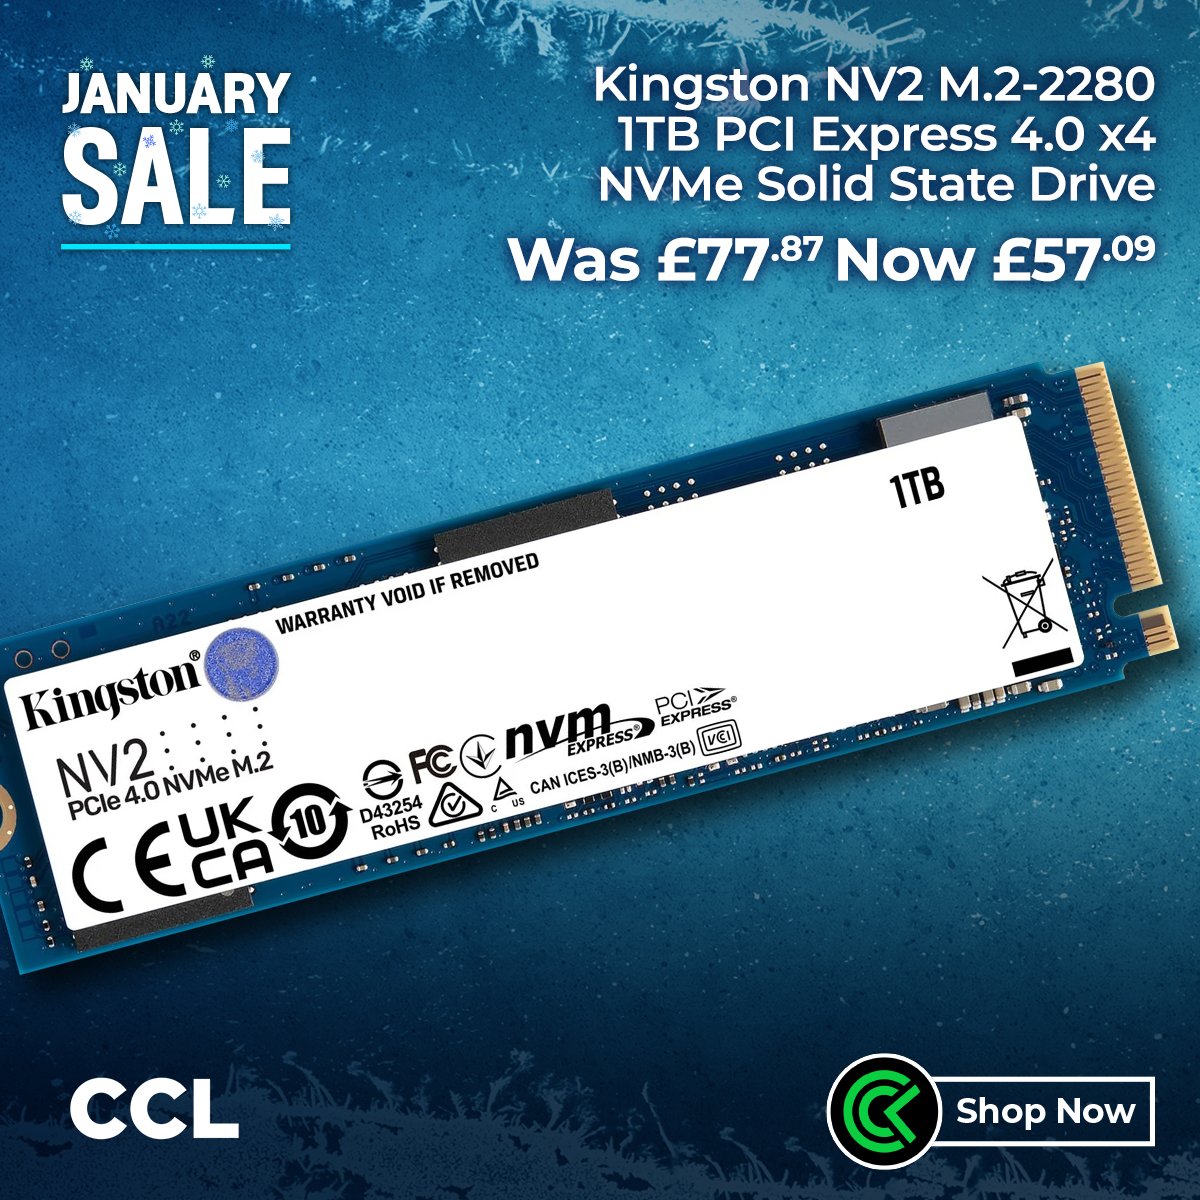 January Sale Now On ❄⁠
⁠
Kingston NV2 M.2 2280 1TB PCIe 4.0 NVMe SSD ⚡⁠
⁠
Give your system the boost it needs with this high-performance SSD now available for as little as £57.09 💰⁠
⁠
Get yours now 🛒
cclonline.com/snv2s-1000g-ki…

#KingstonTechnology #KingstonIsWithYou